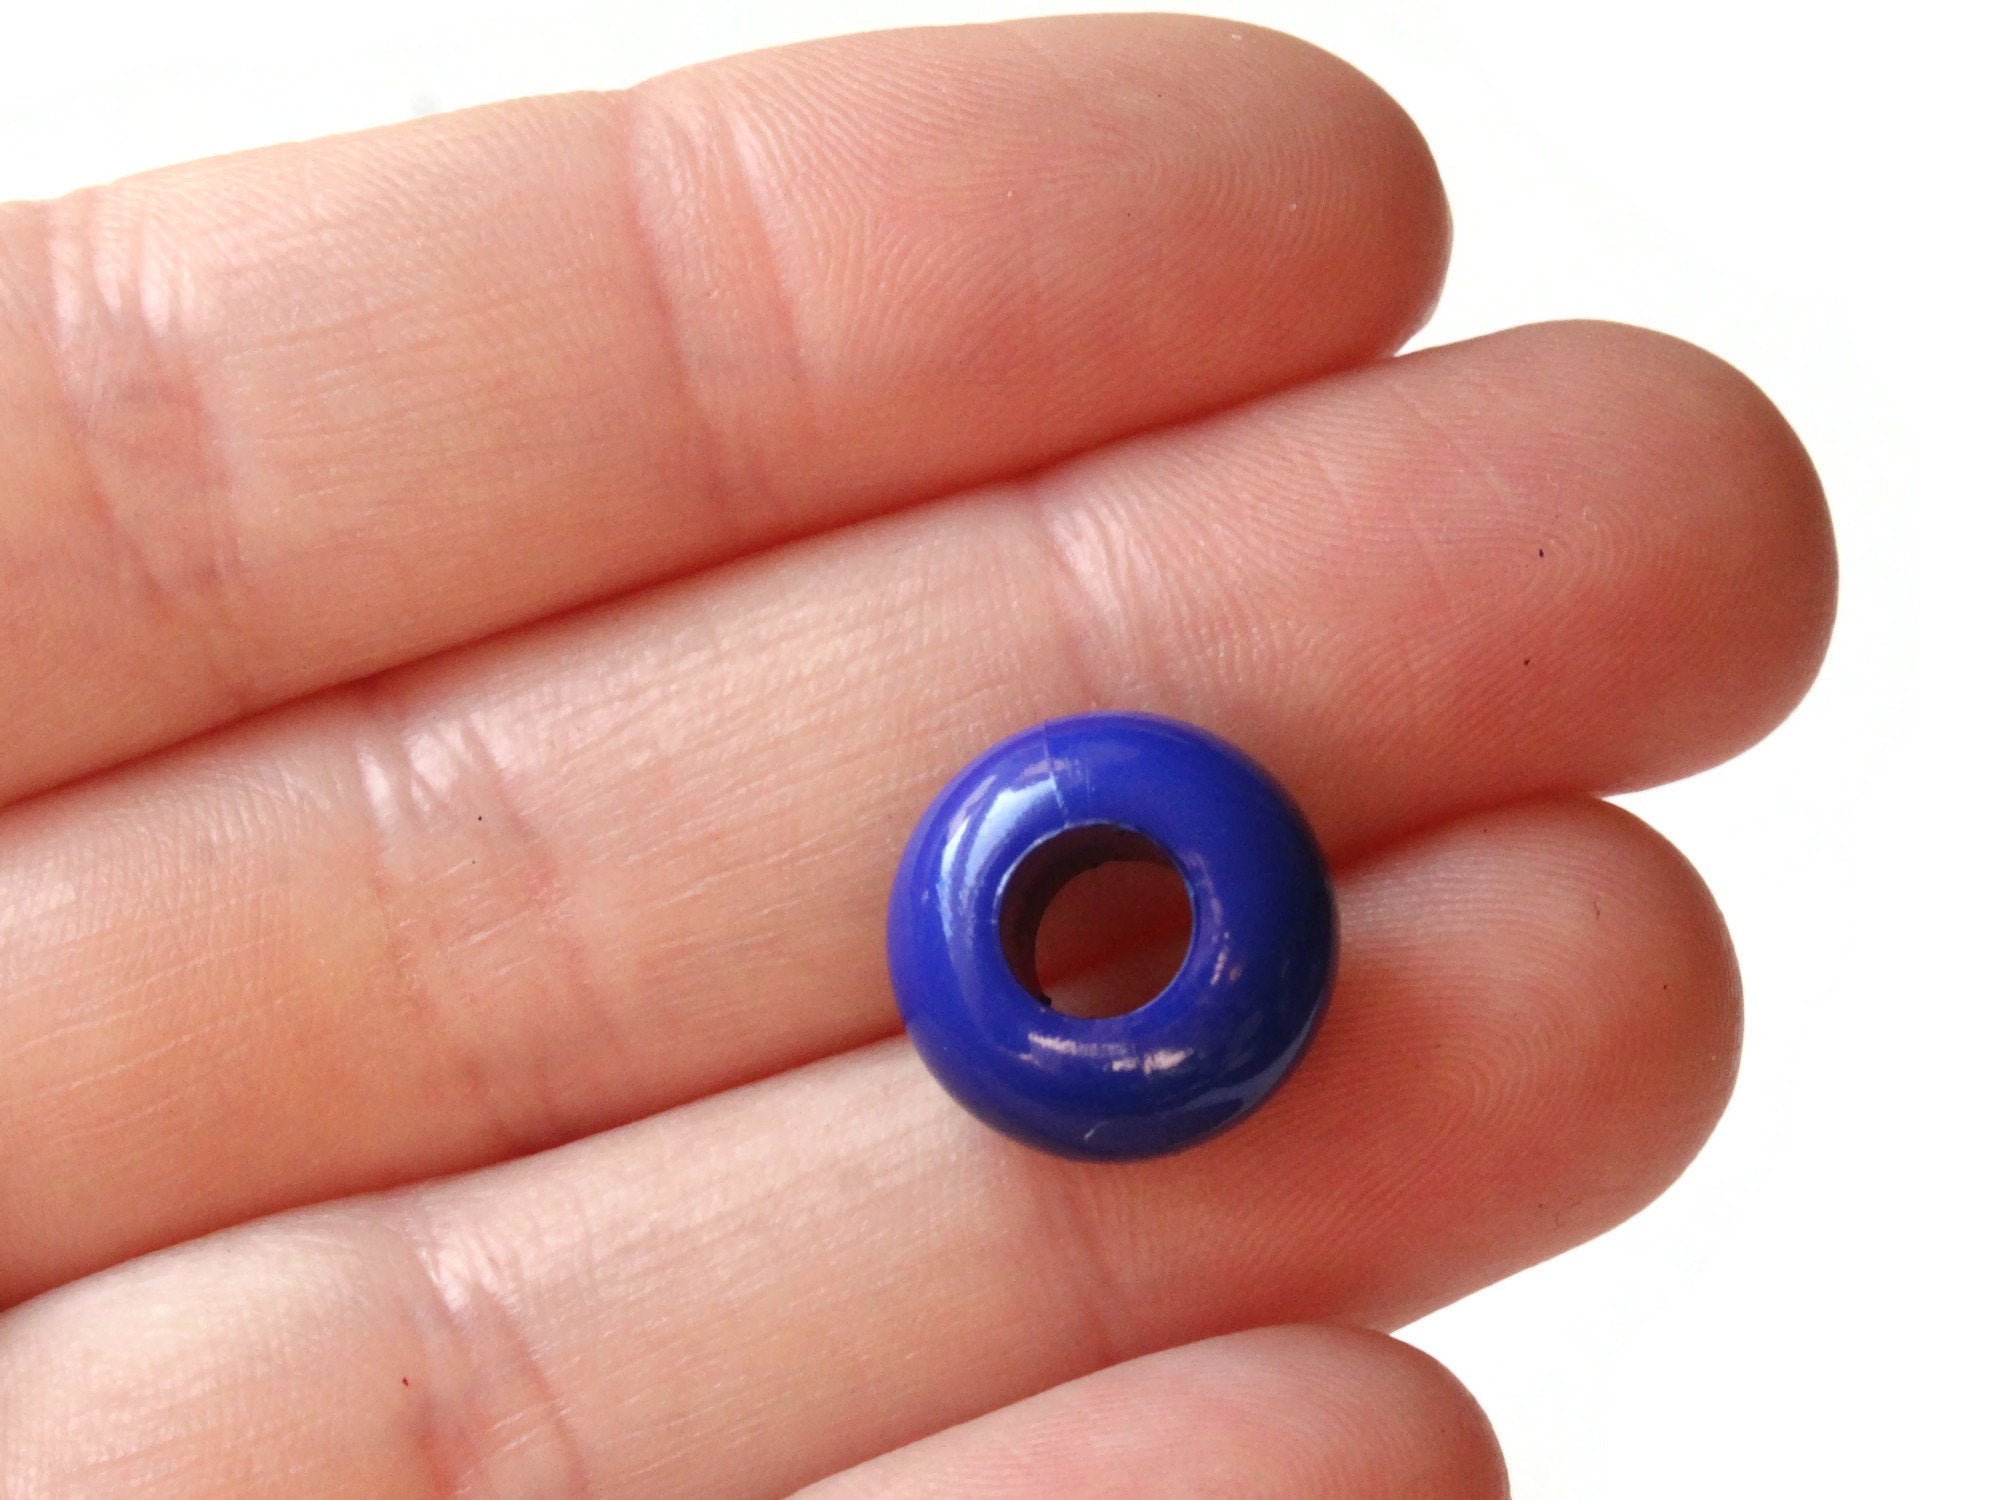 Large Hole Glass Beads, 6mm X 9mm Rondelle Roller With 3mm Hole, Blue With  Gold Lining, 10 Pieces 